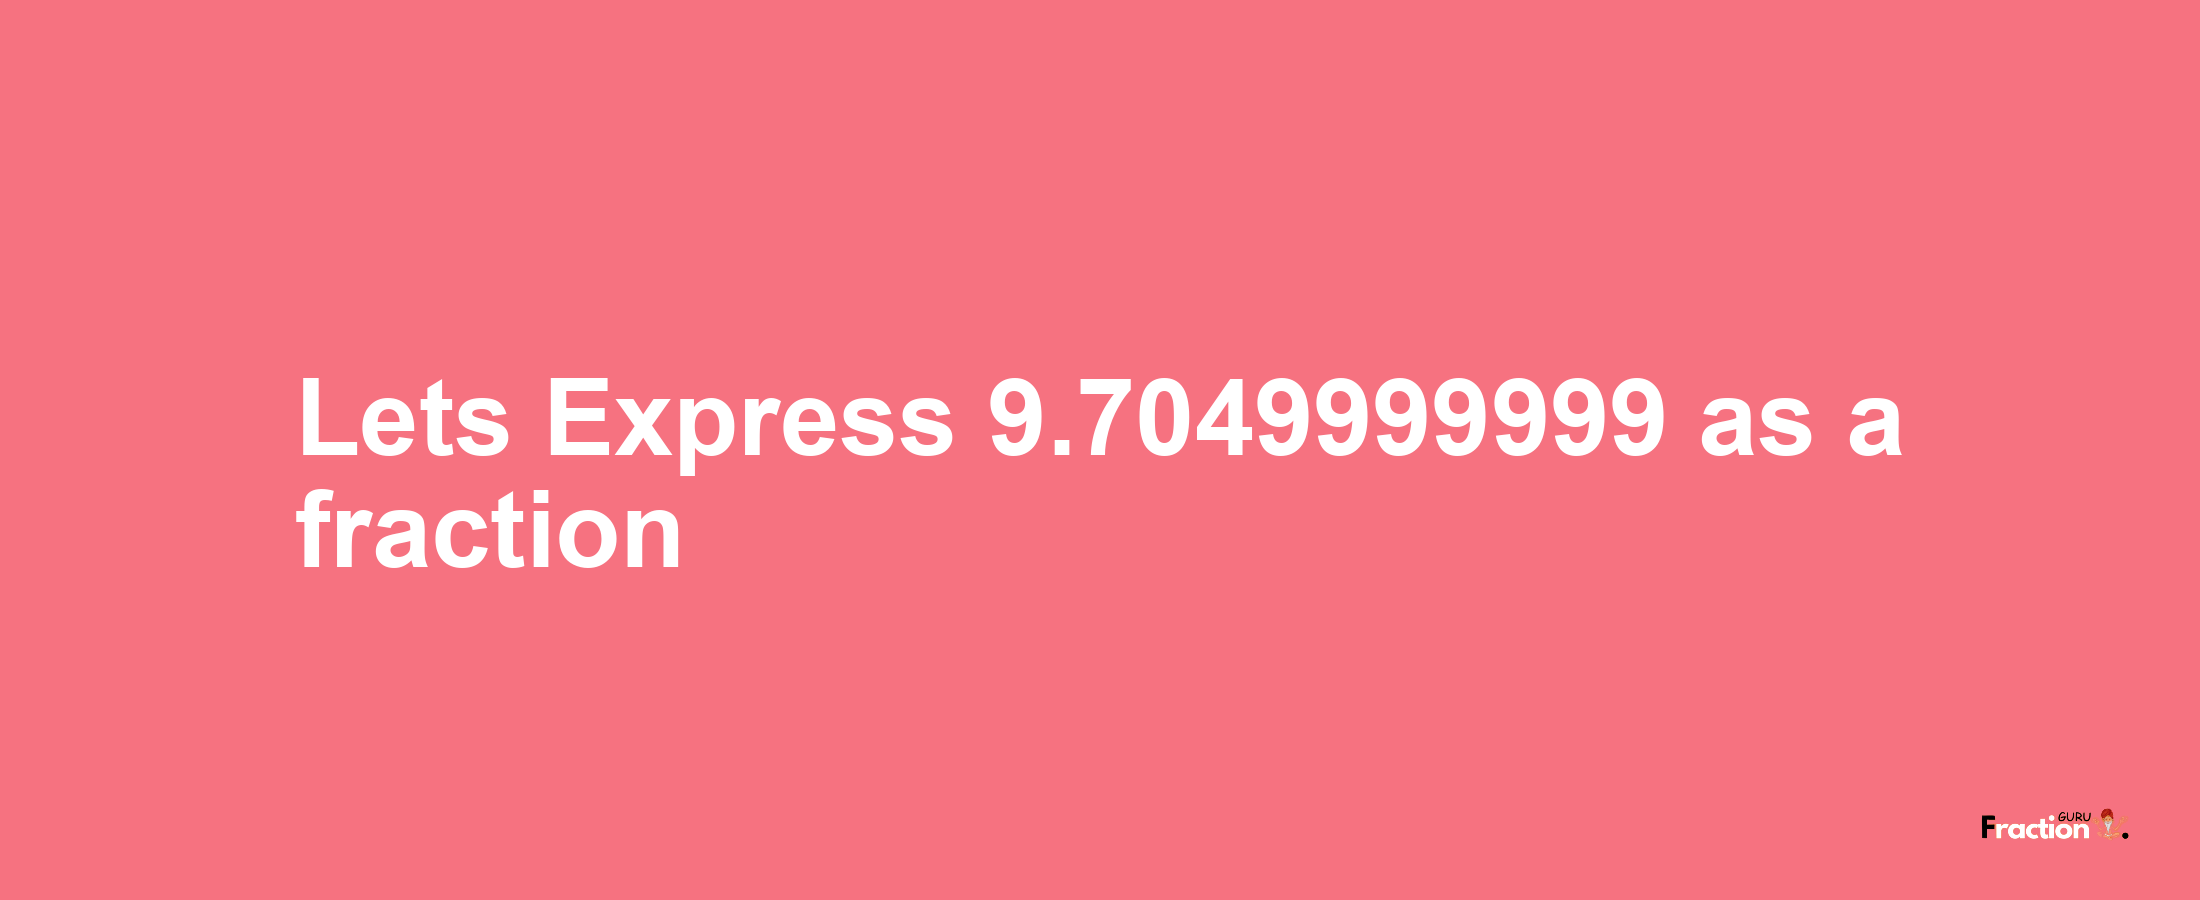 Lets Express 9.7049999999 as afraction